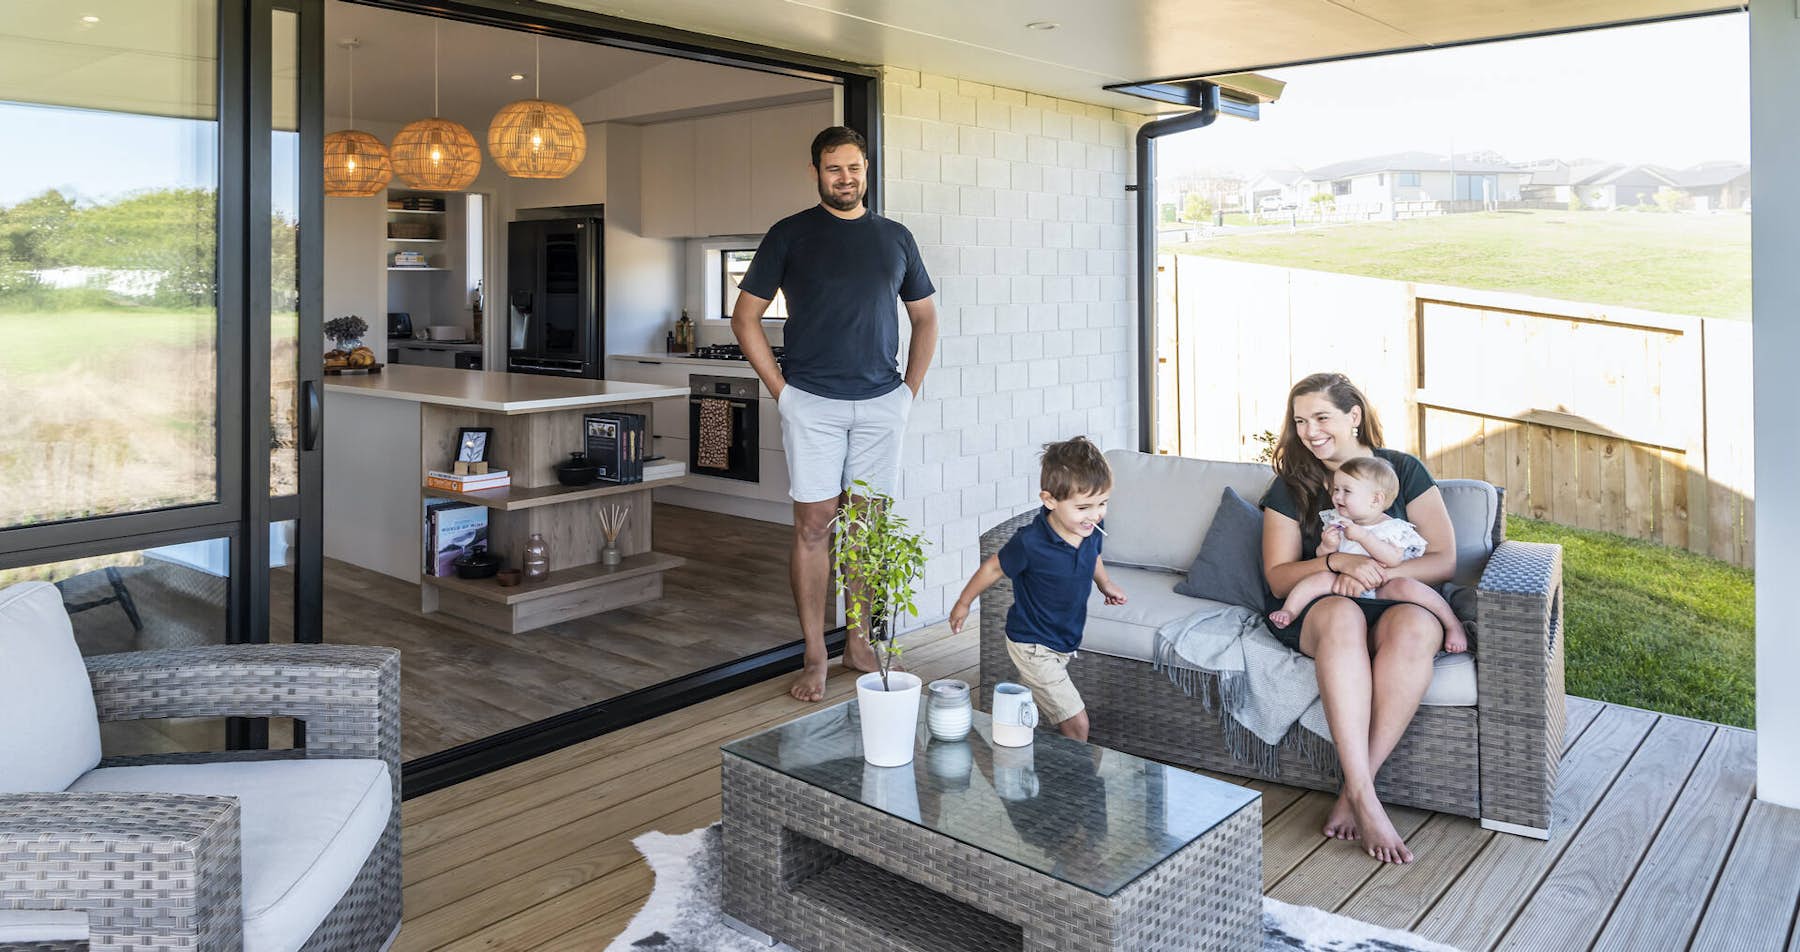 How this family expertly built their stylish first home with resale in mind